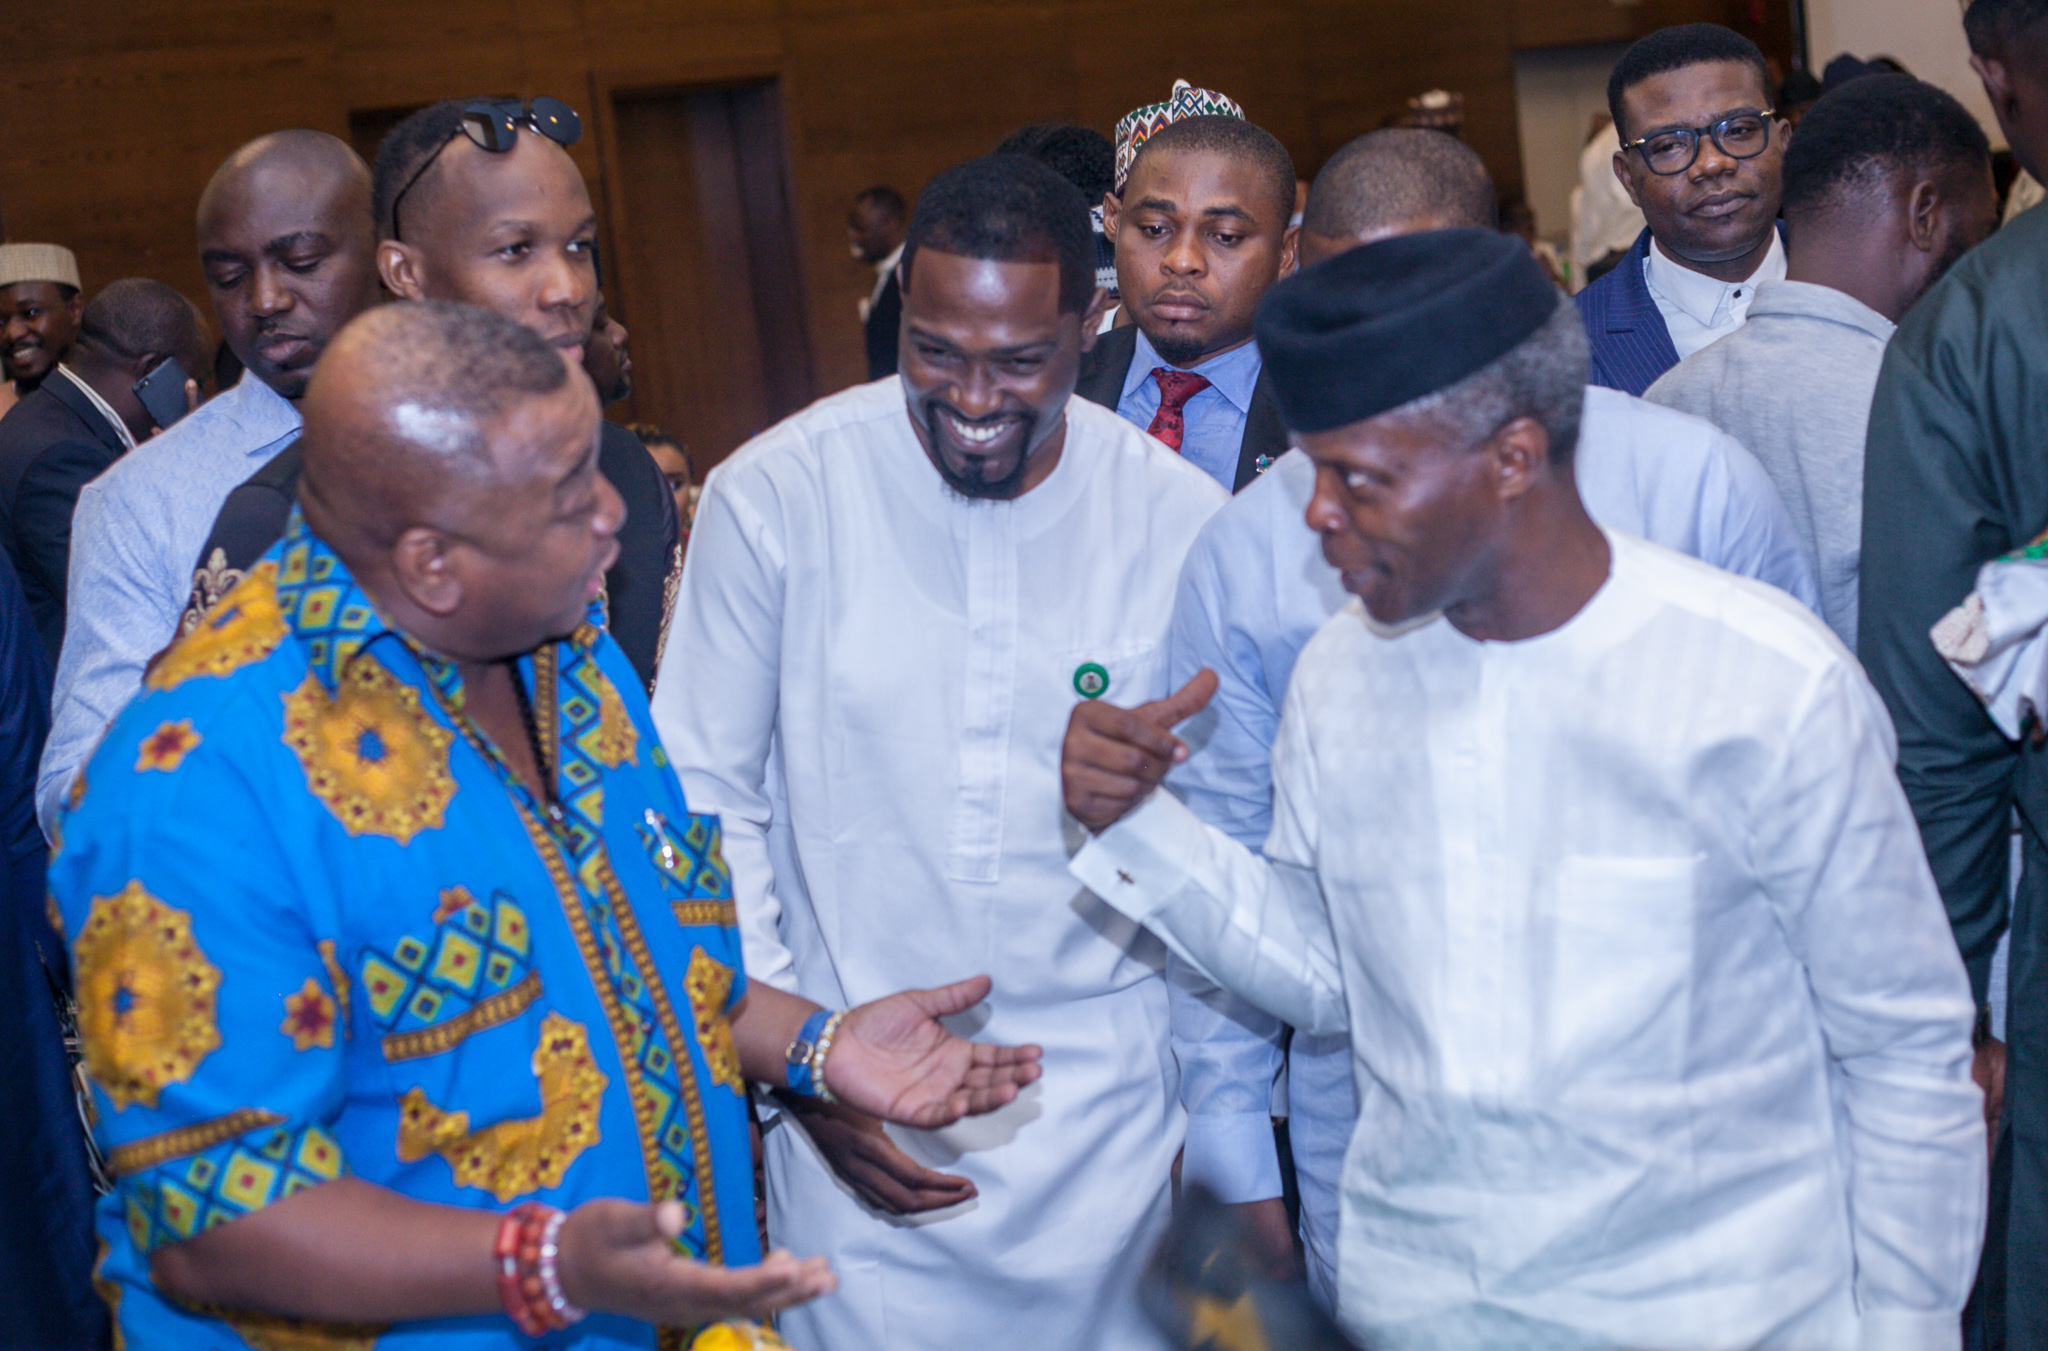 Entertainment Industry Crucial To Our Economy, Says Osinbajo